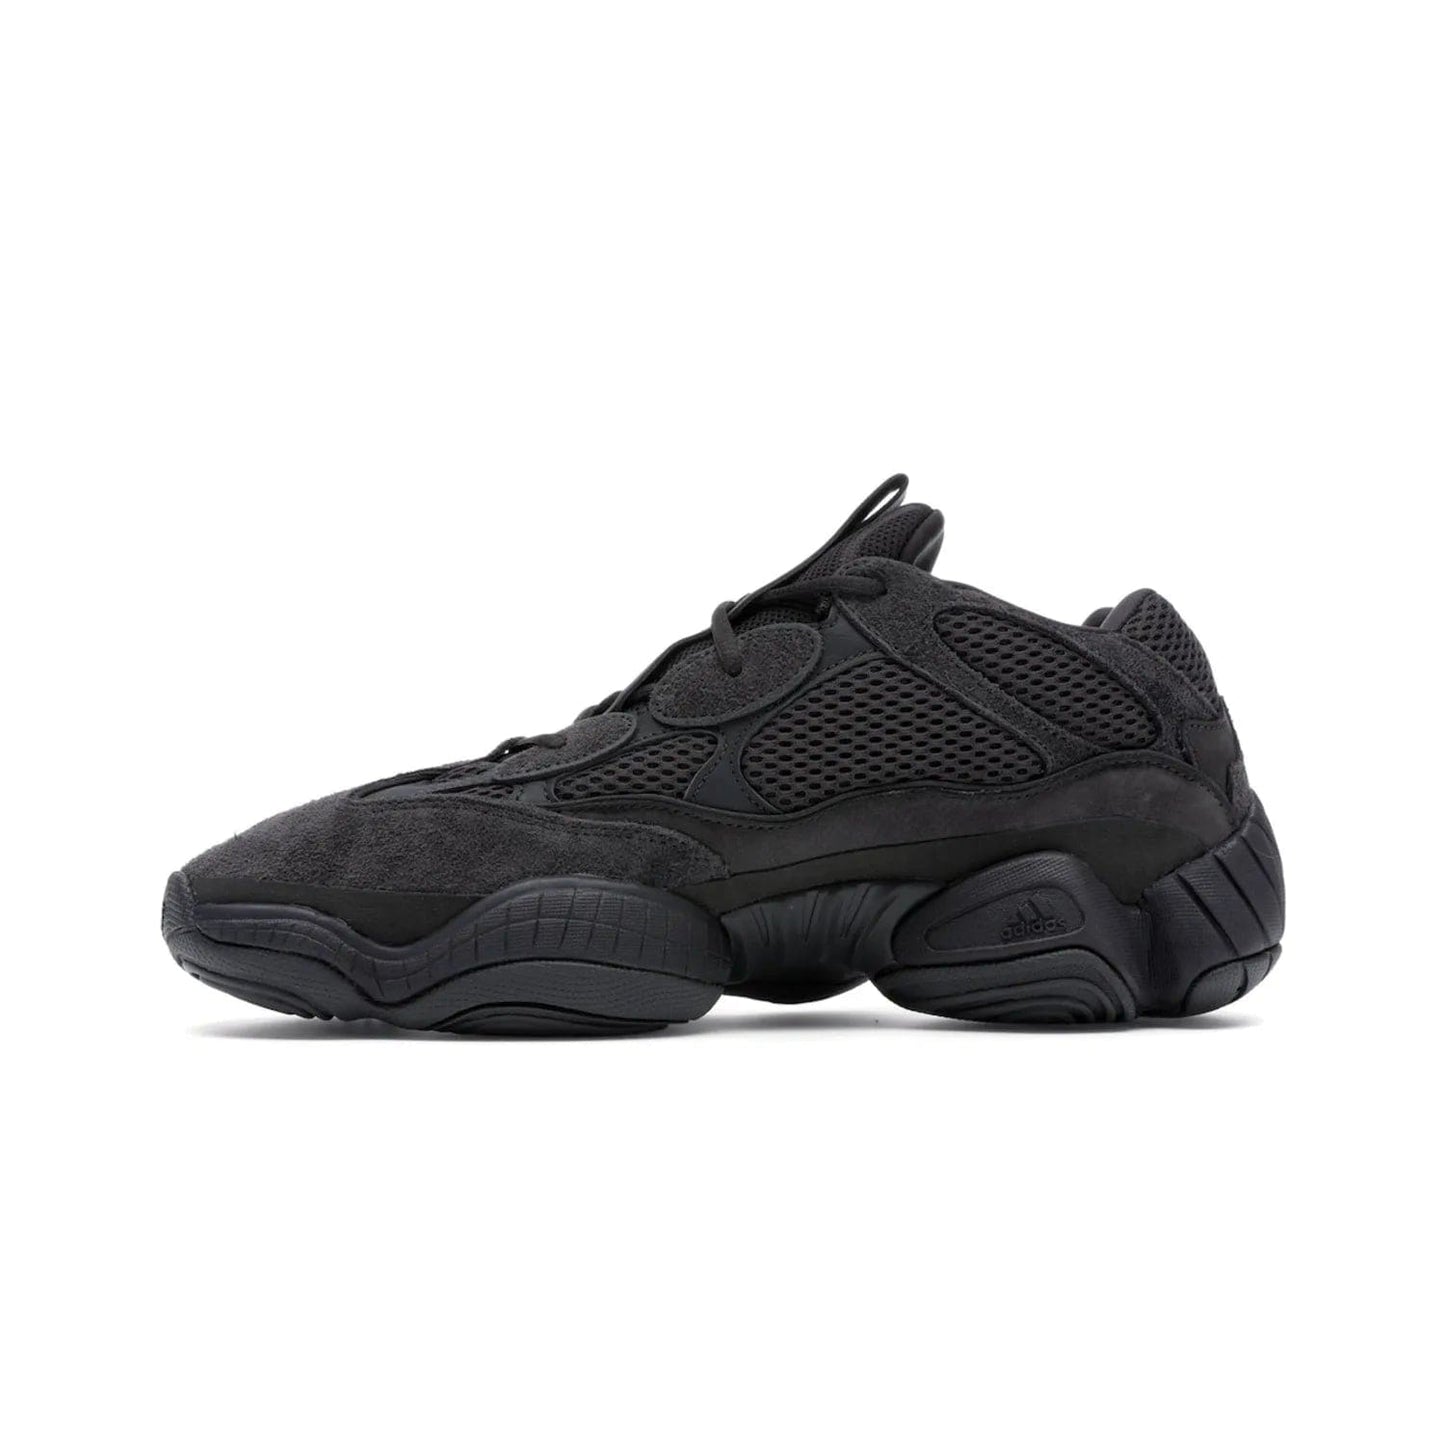 adidas Yeezy 500 Utility Black - Image 19 - Only at www.BallersClubKickz.com - Iconic adidas Yeezy 500 Utility Black in All-Black colorway. Durable black mesh and suede upper with adiPRENE® sole delivers comfort and support. Be unstoppable with the Yeezy 500 Utility Black. Released July 2018.